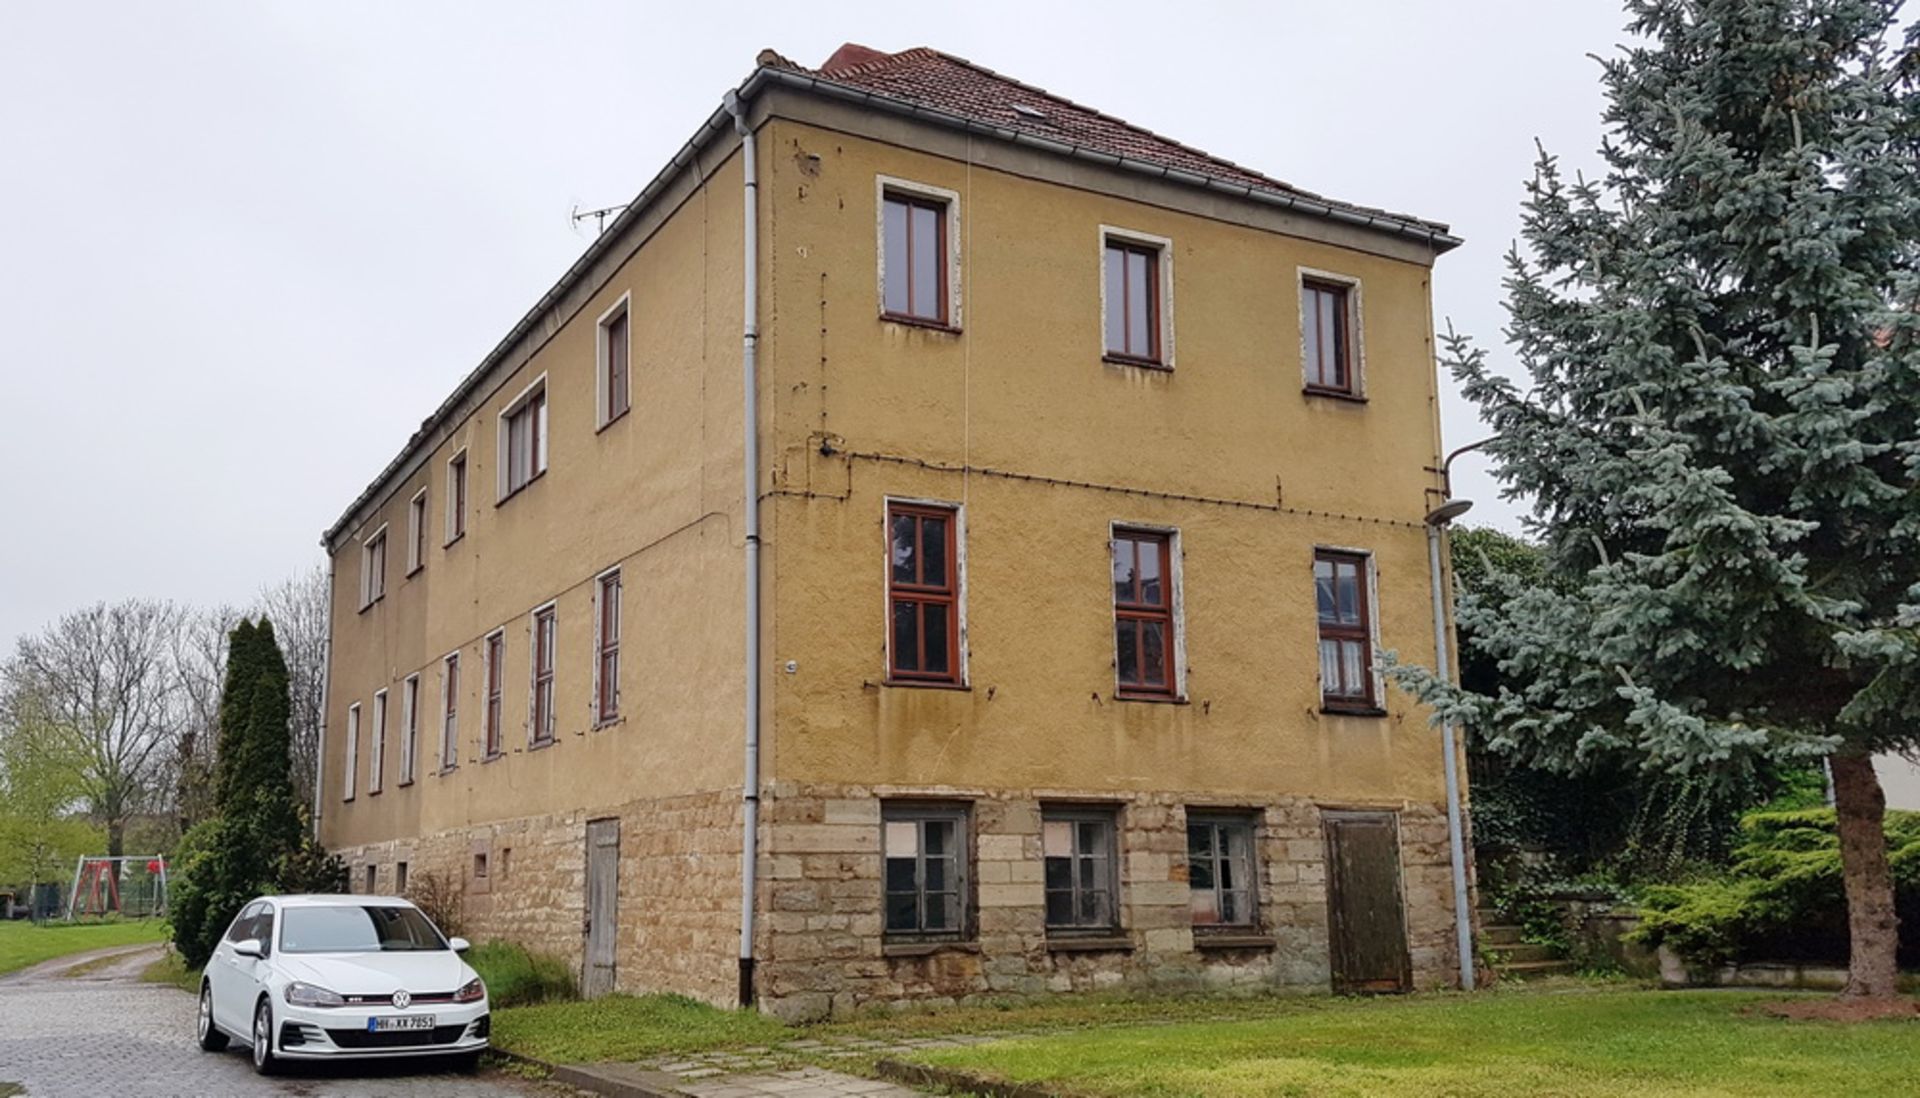 LARGE HOUSING BLOCK HORNSOMMEM, GERMANY READY TO MOVE INTO FREEHOLD VACANT POSSESSION - Image 21 of 91